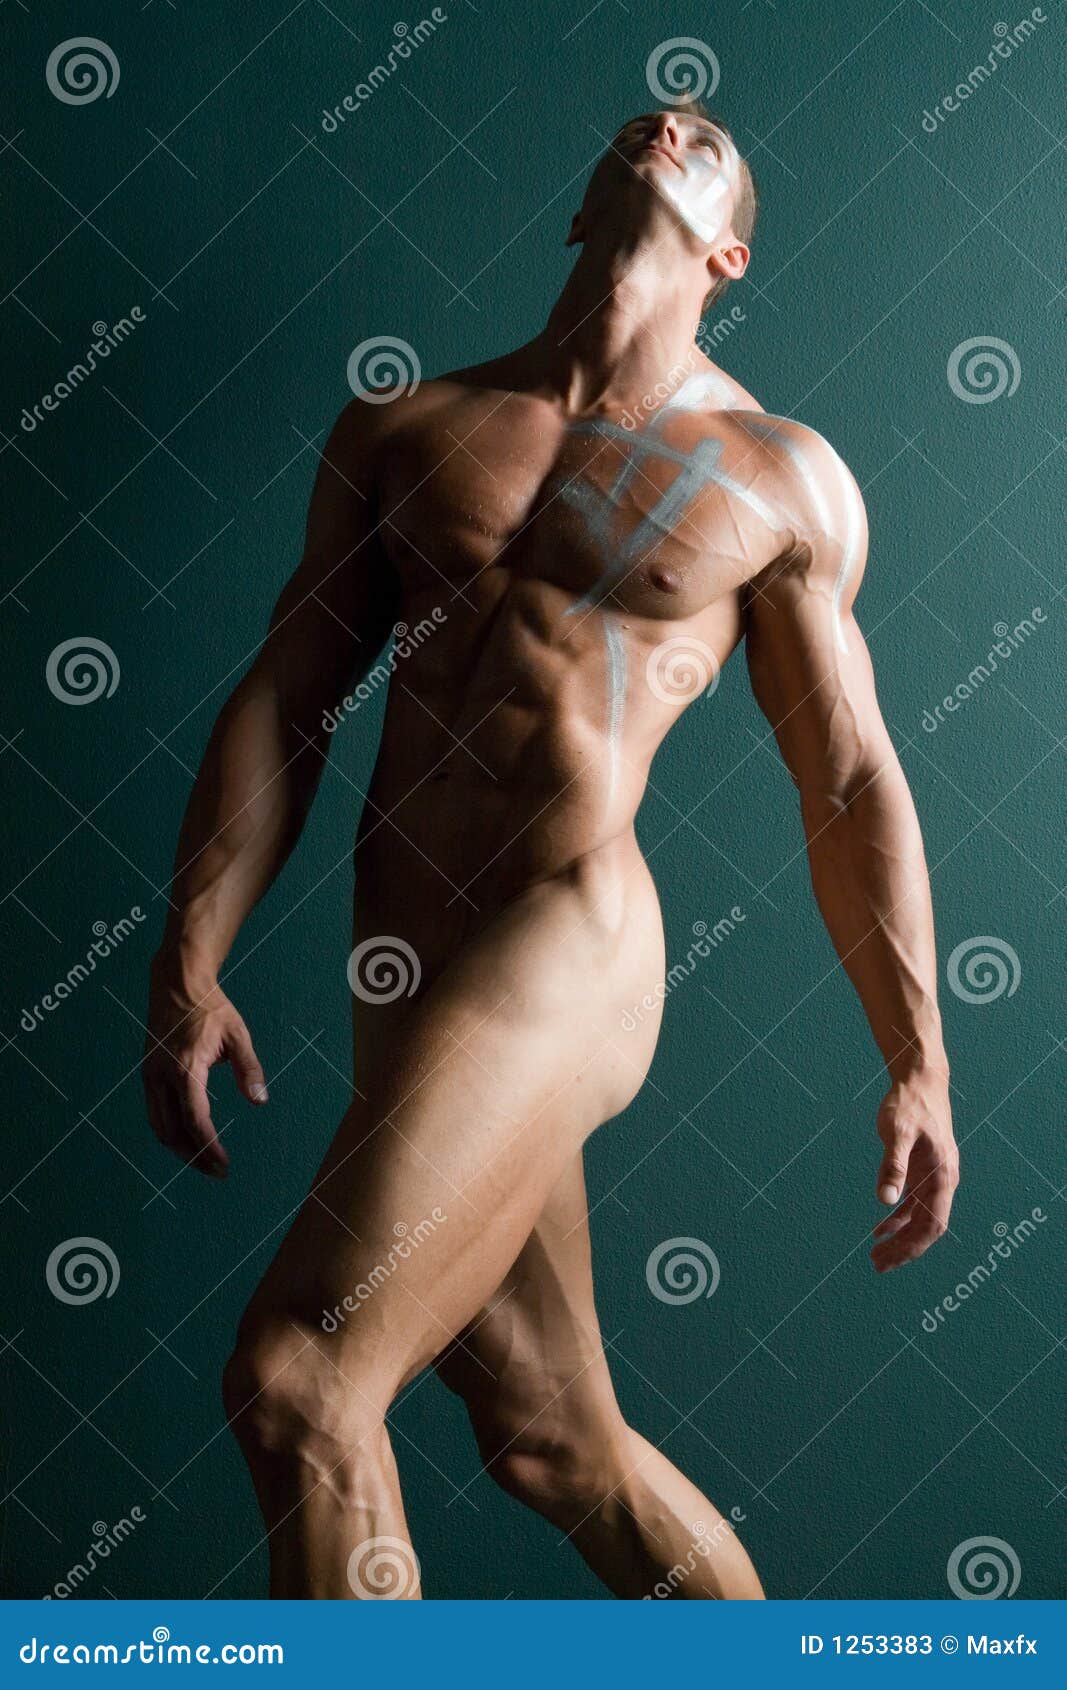 The Male Nude Body